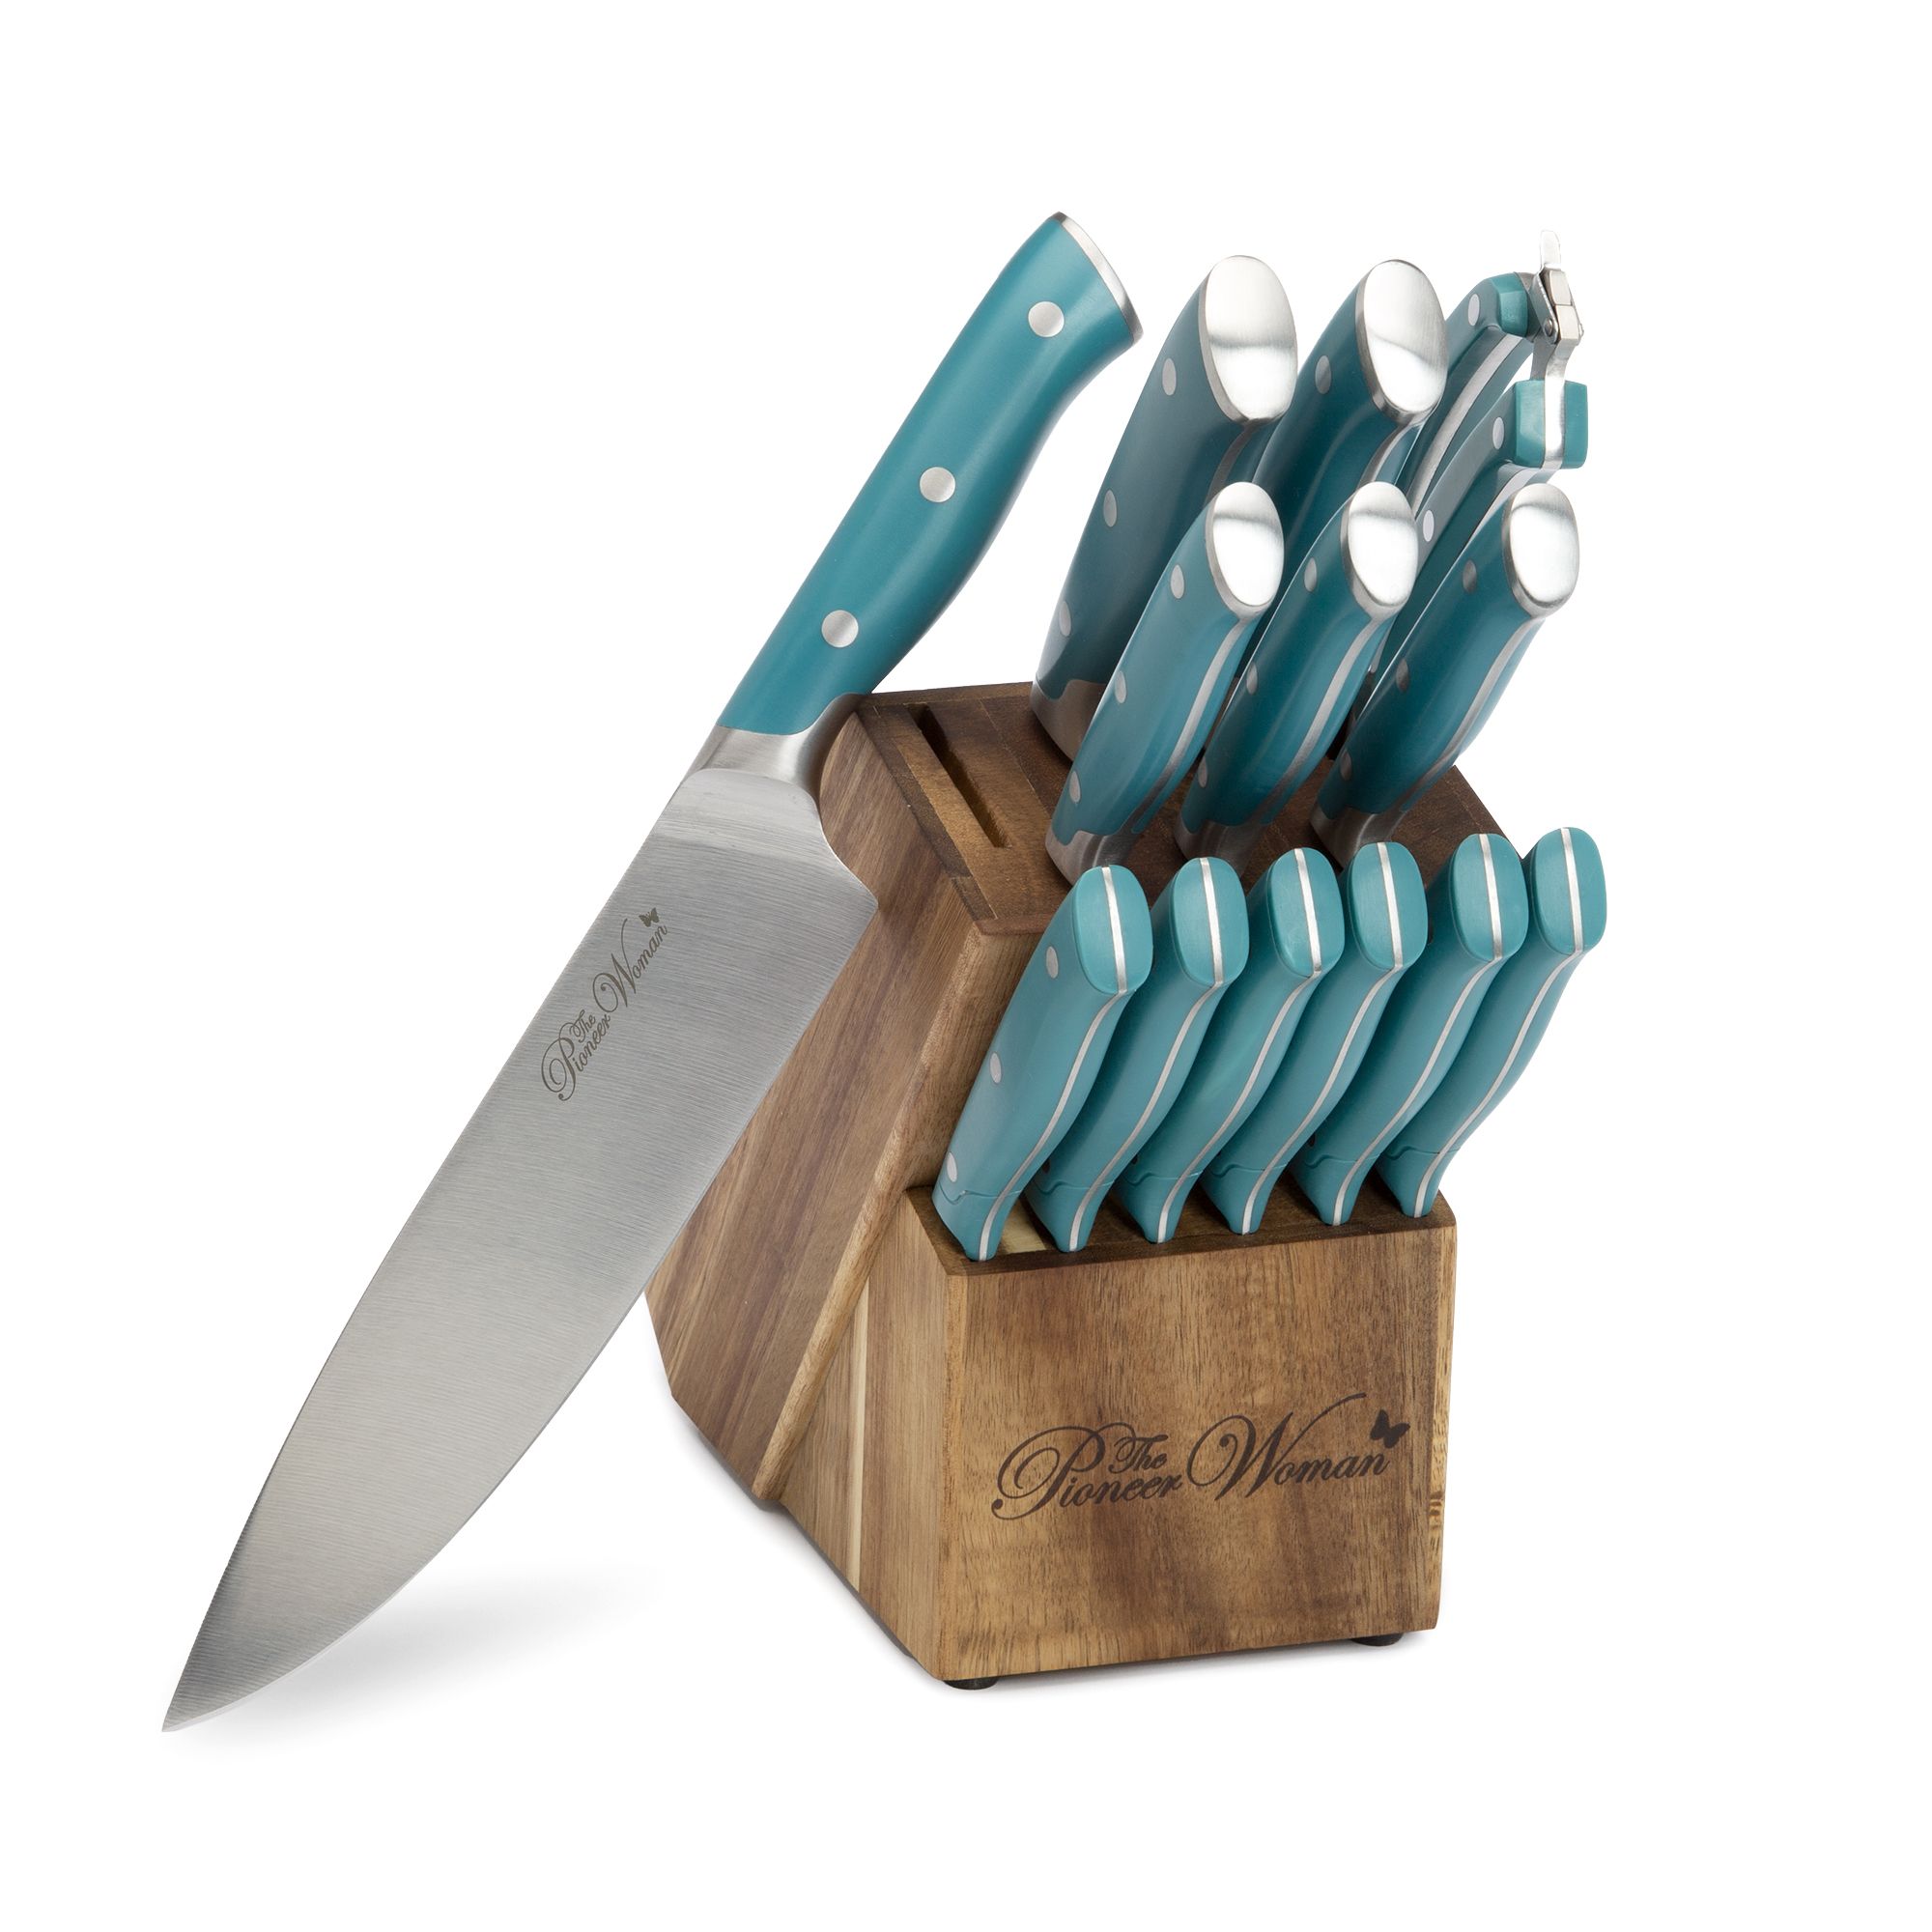 The Pioneer Woman Signature 14-Piece Stainless Steel Knife Block Set